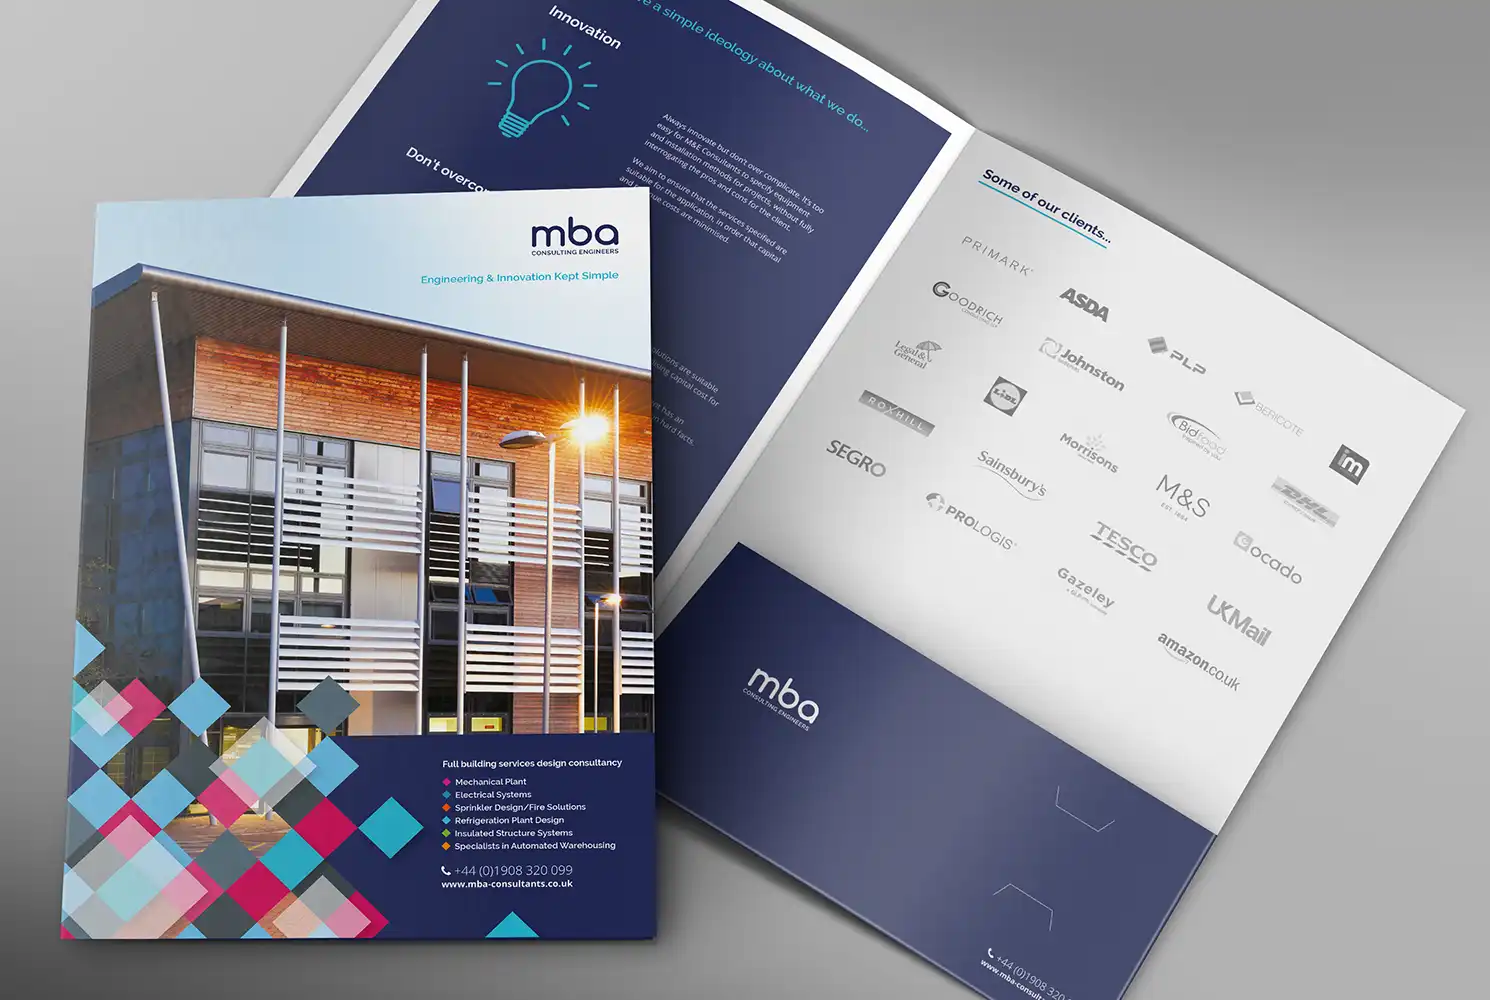 Mock up showing the cover and inside spread of the MBA presentation folder